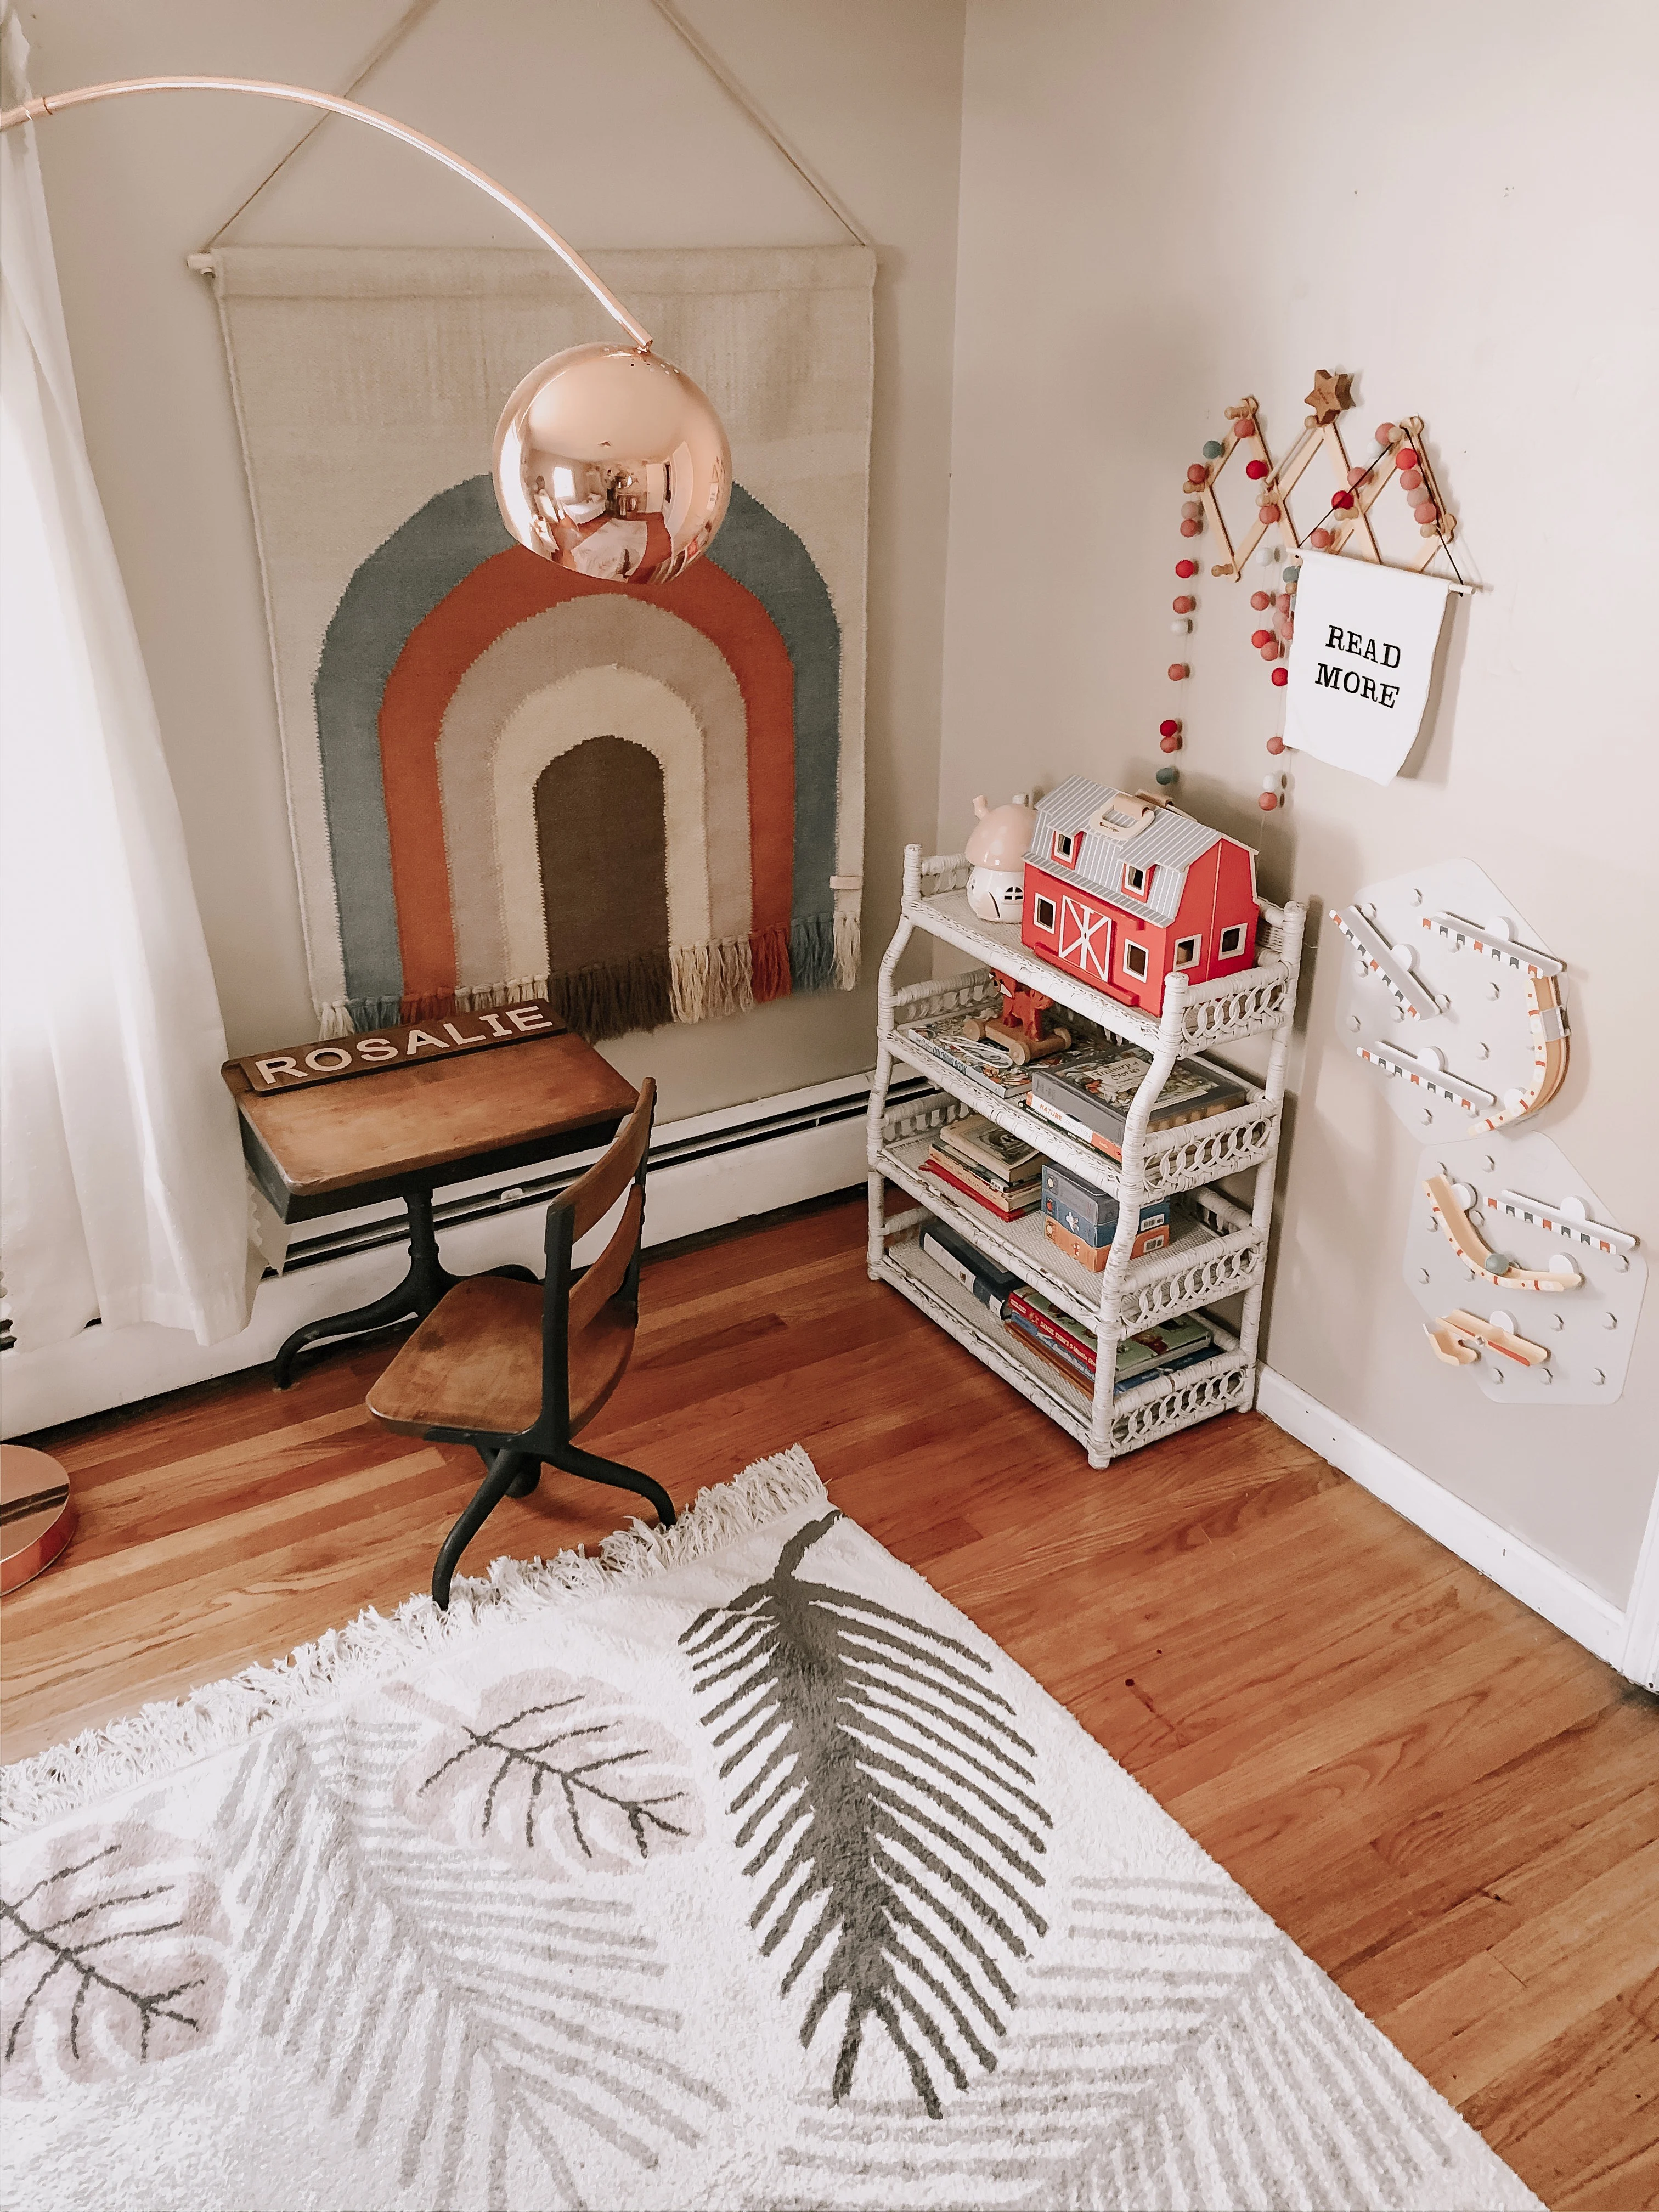 Girl's Room with Vintage Desk and Rainbow Wall Hanging (look at that cool marble run!)